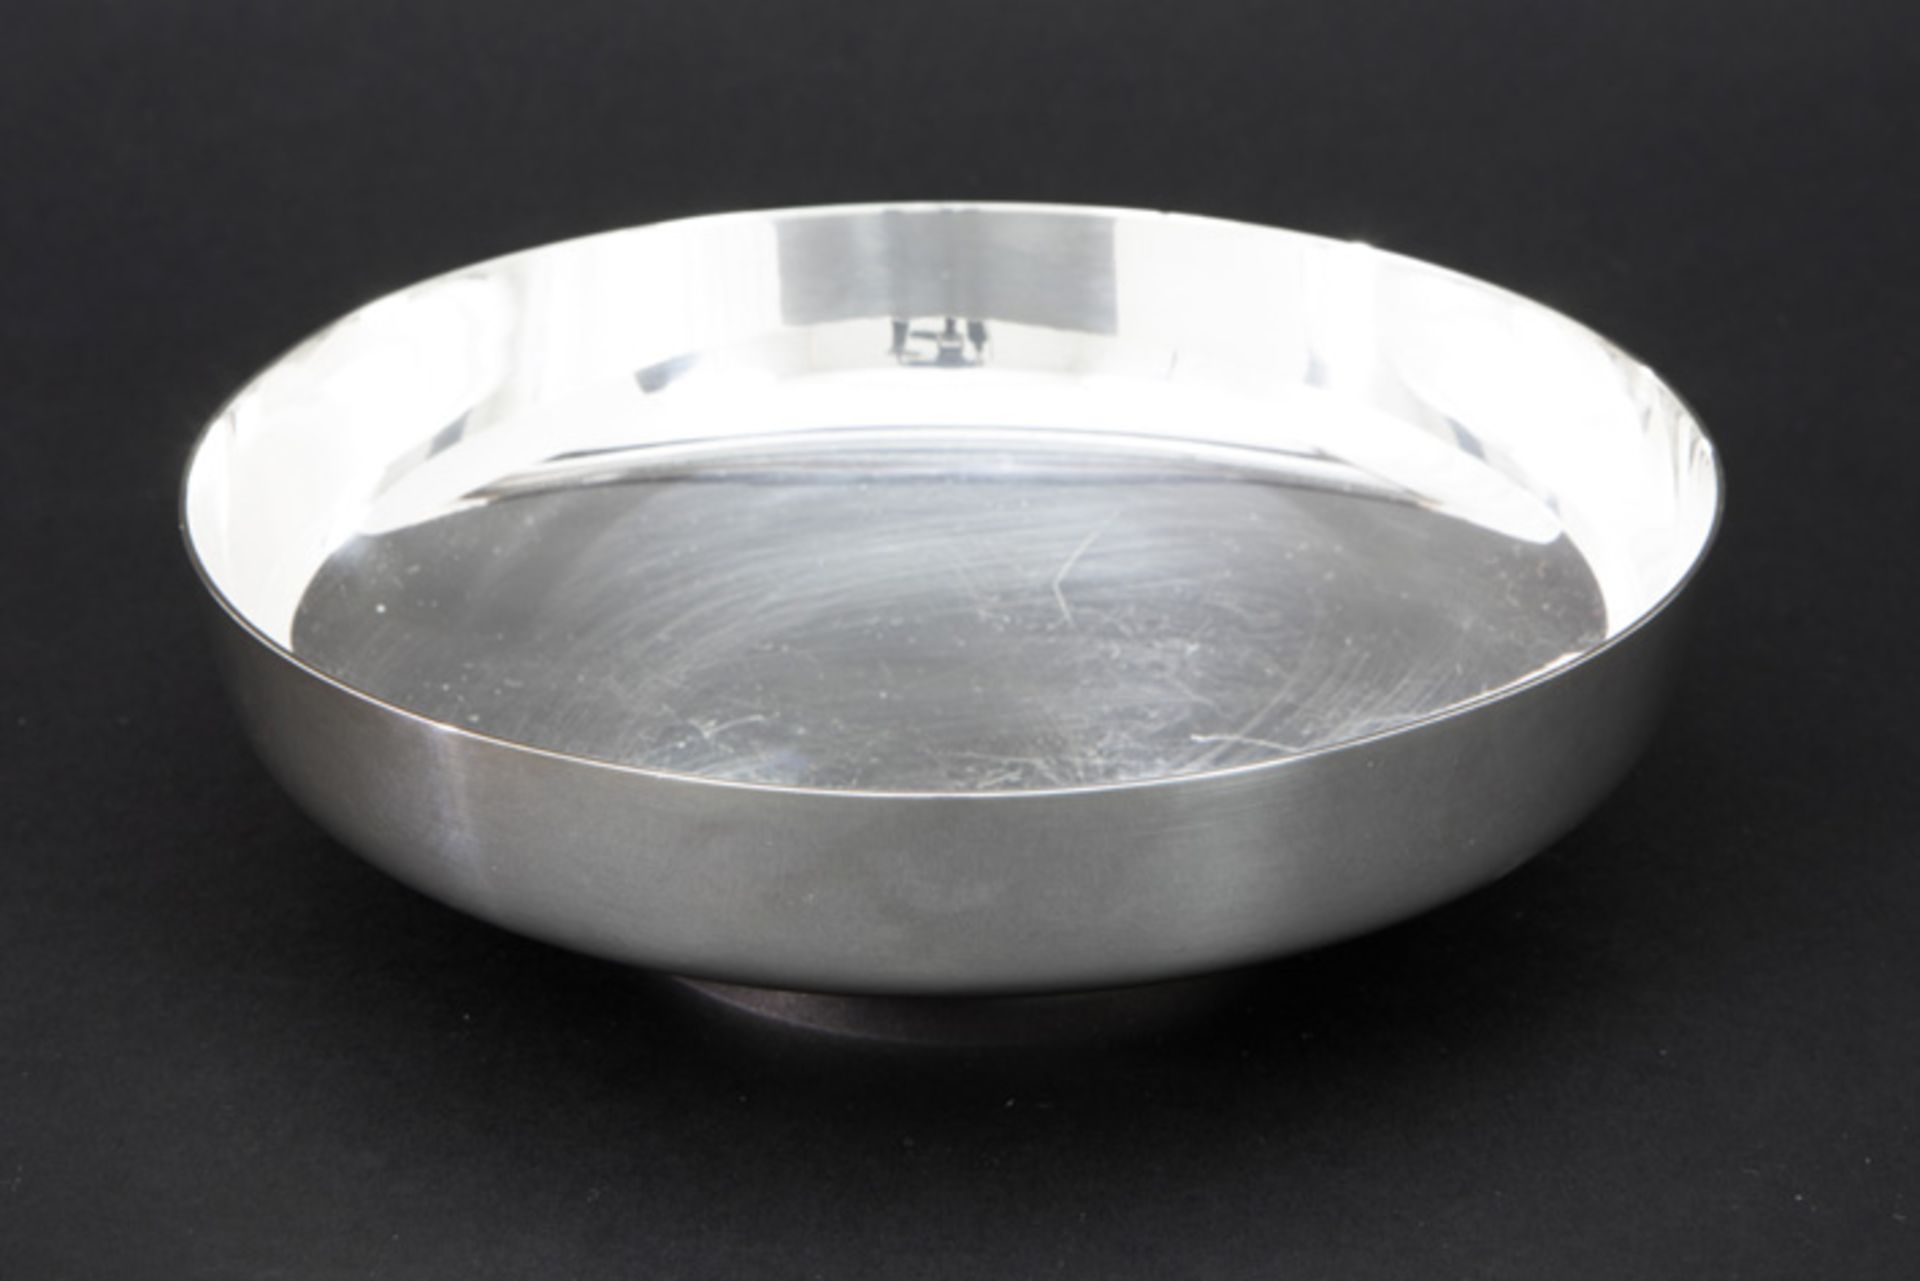 sixties' Henning Koppel design dish in Georg Jensen sterling marked silver - with his monogram|| - Image 2 of 4